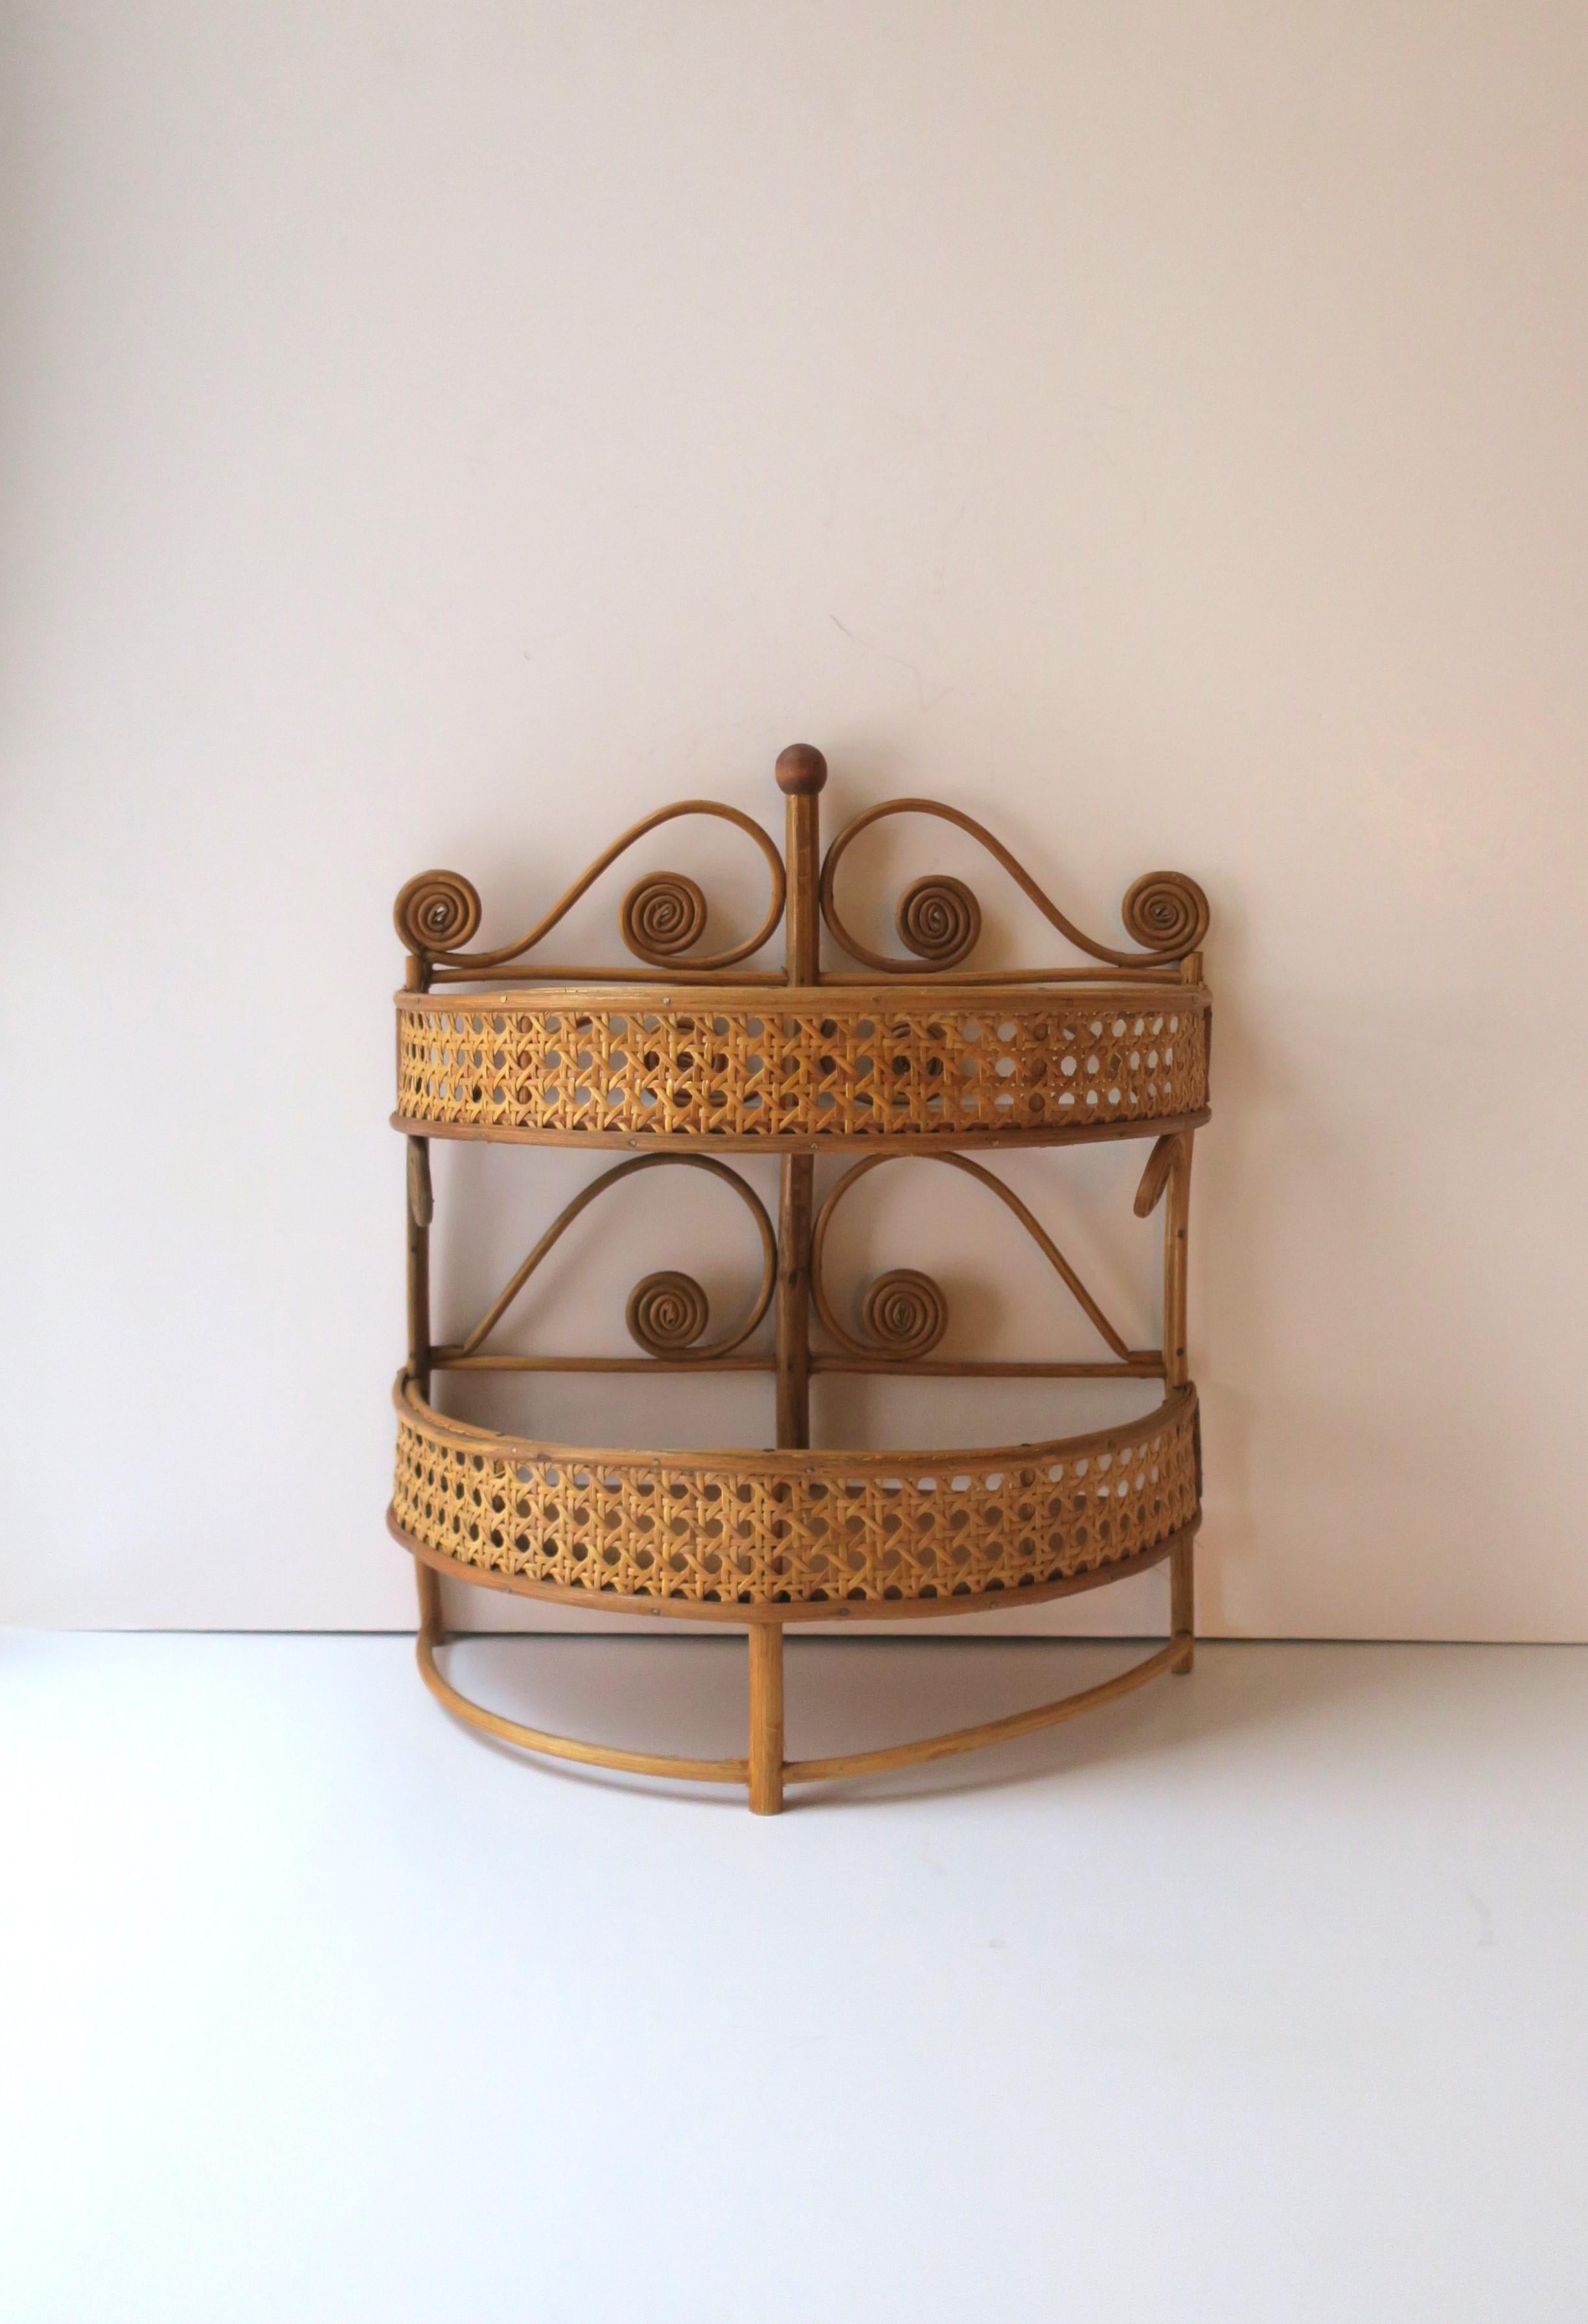 A demi-lune wicker and cane wall shelf, circa mid-20th century. The cane wraps around front in a clean, modern manner, with the bent and curl detail indicating a touch of Victorian and Art Nouveau styles. Piece has two shelves for storage. Piece is